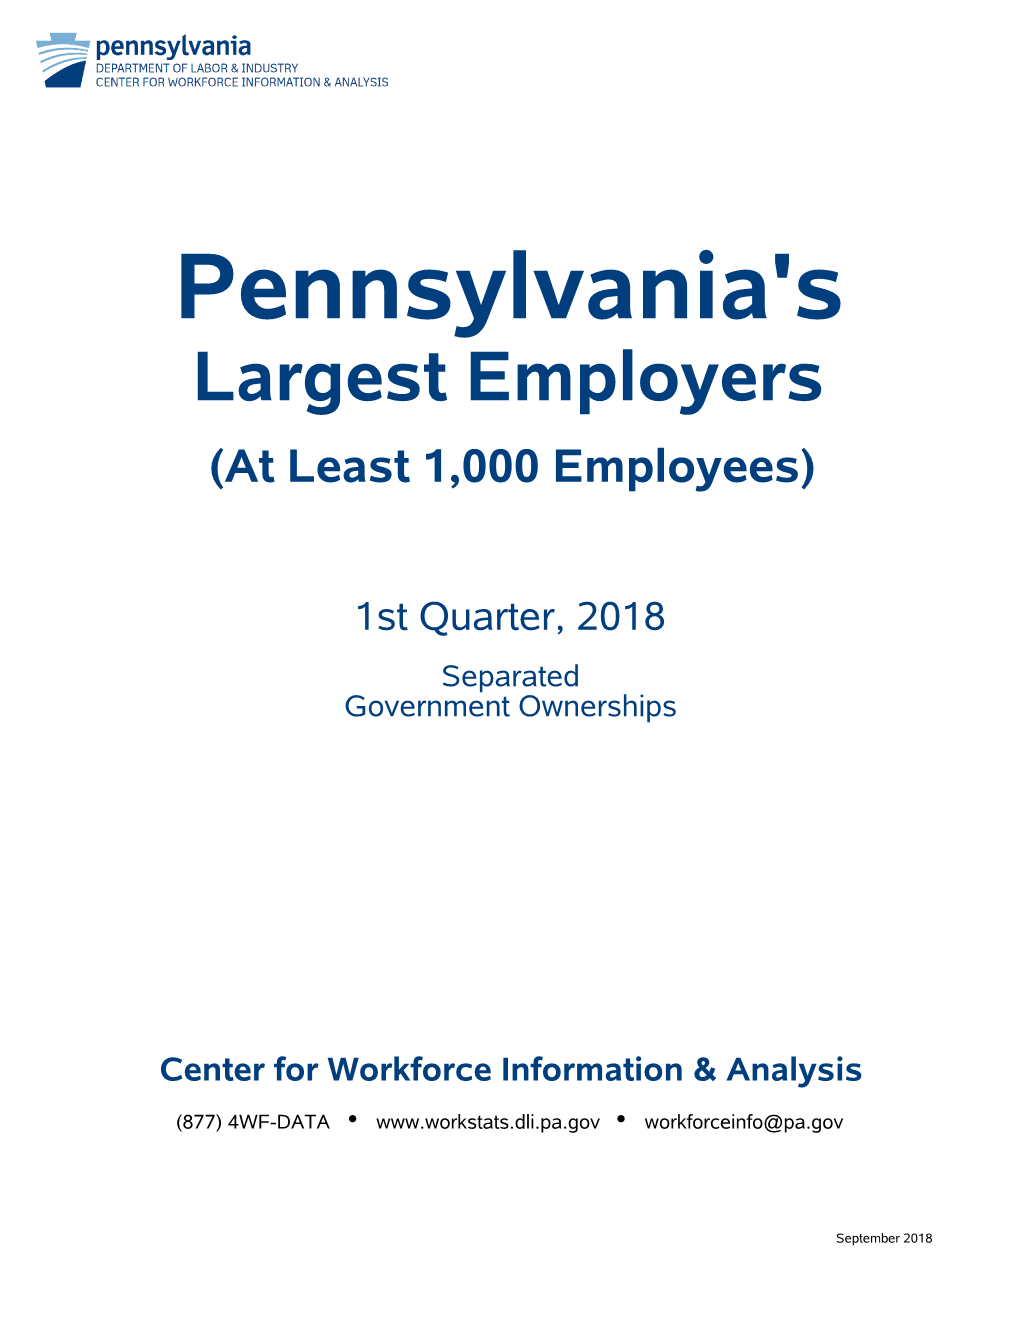 Pennsylvania's Largest Employers (At Least 1,000 Employees)